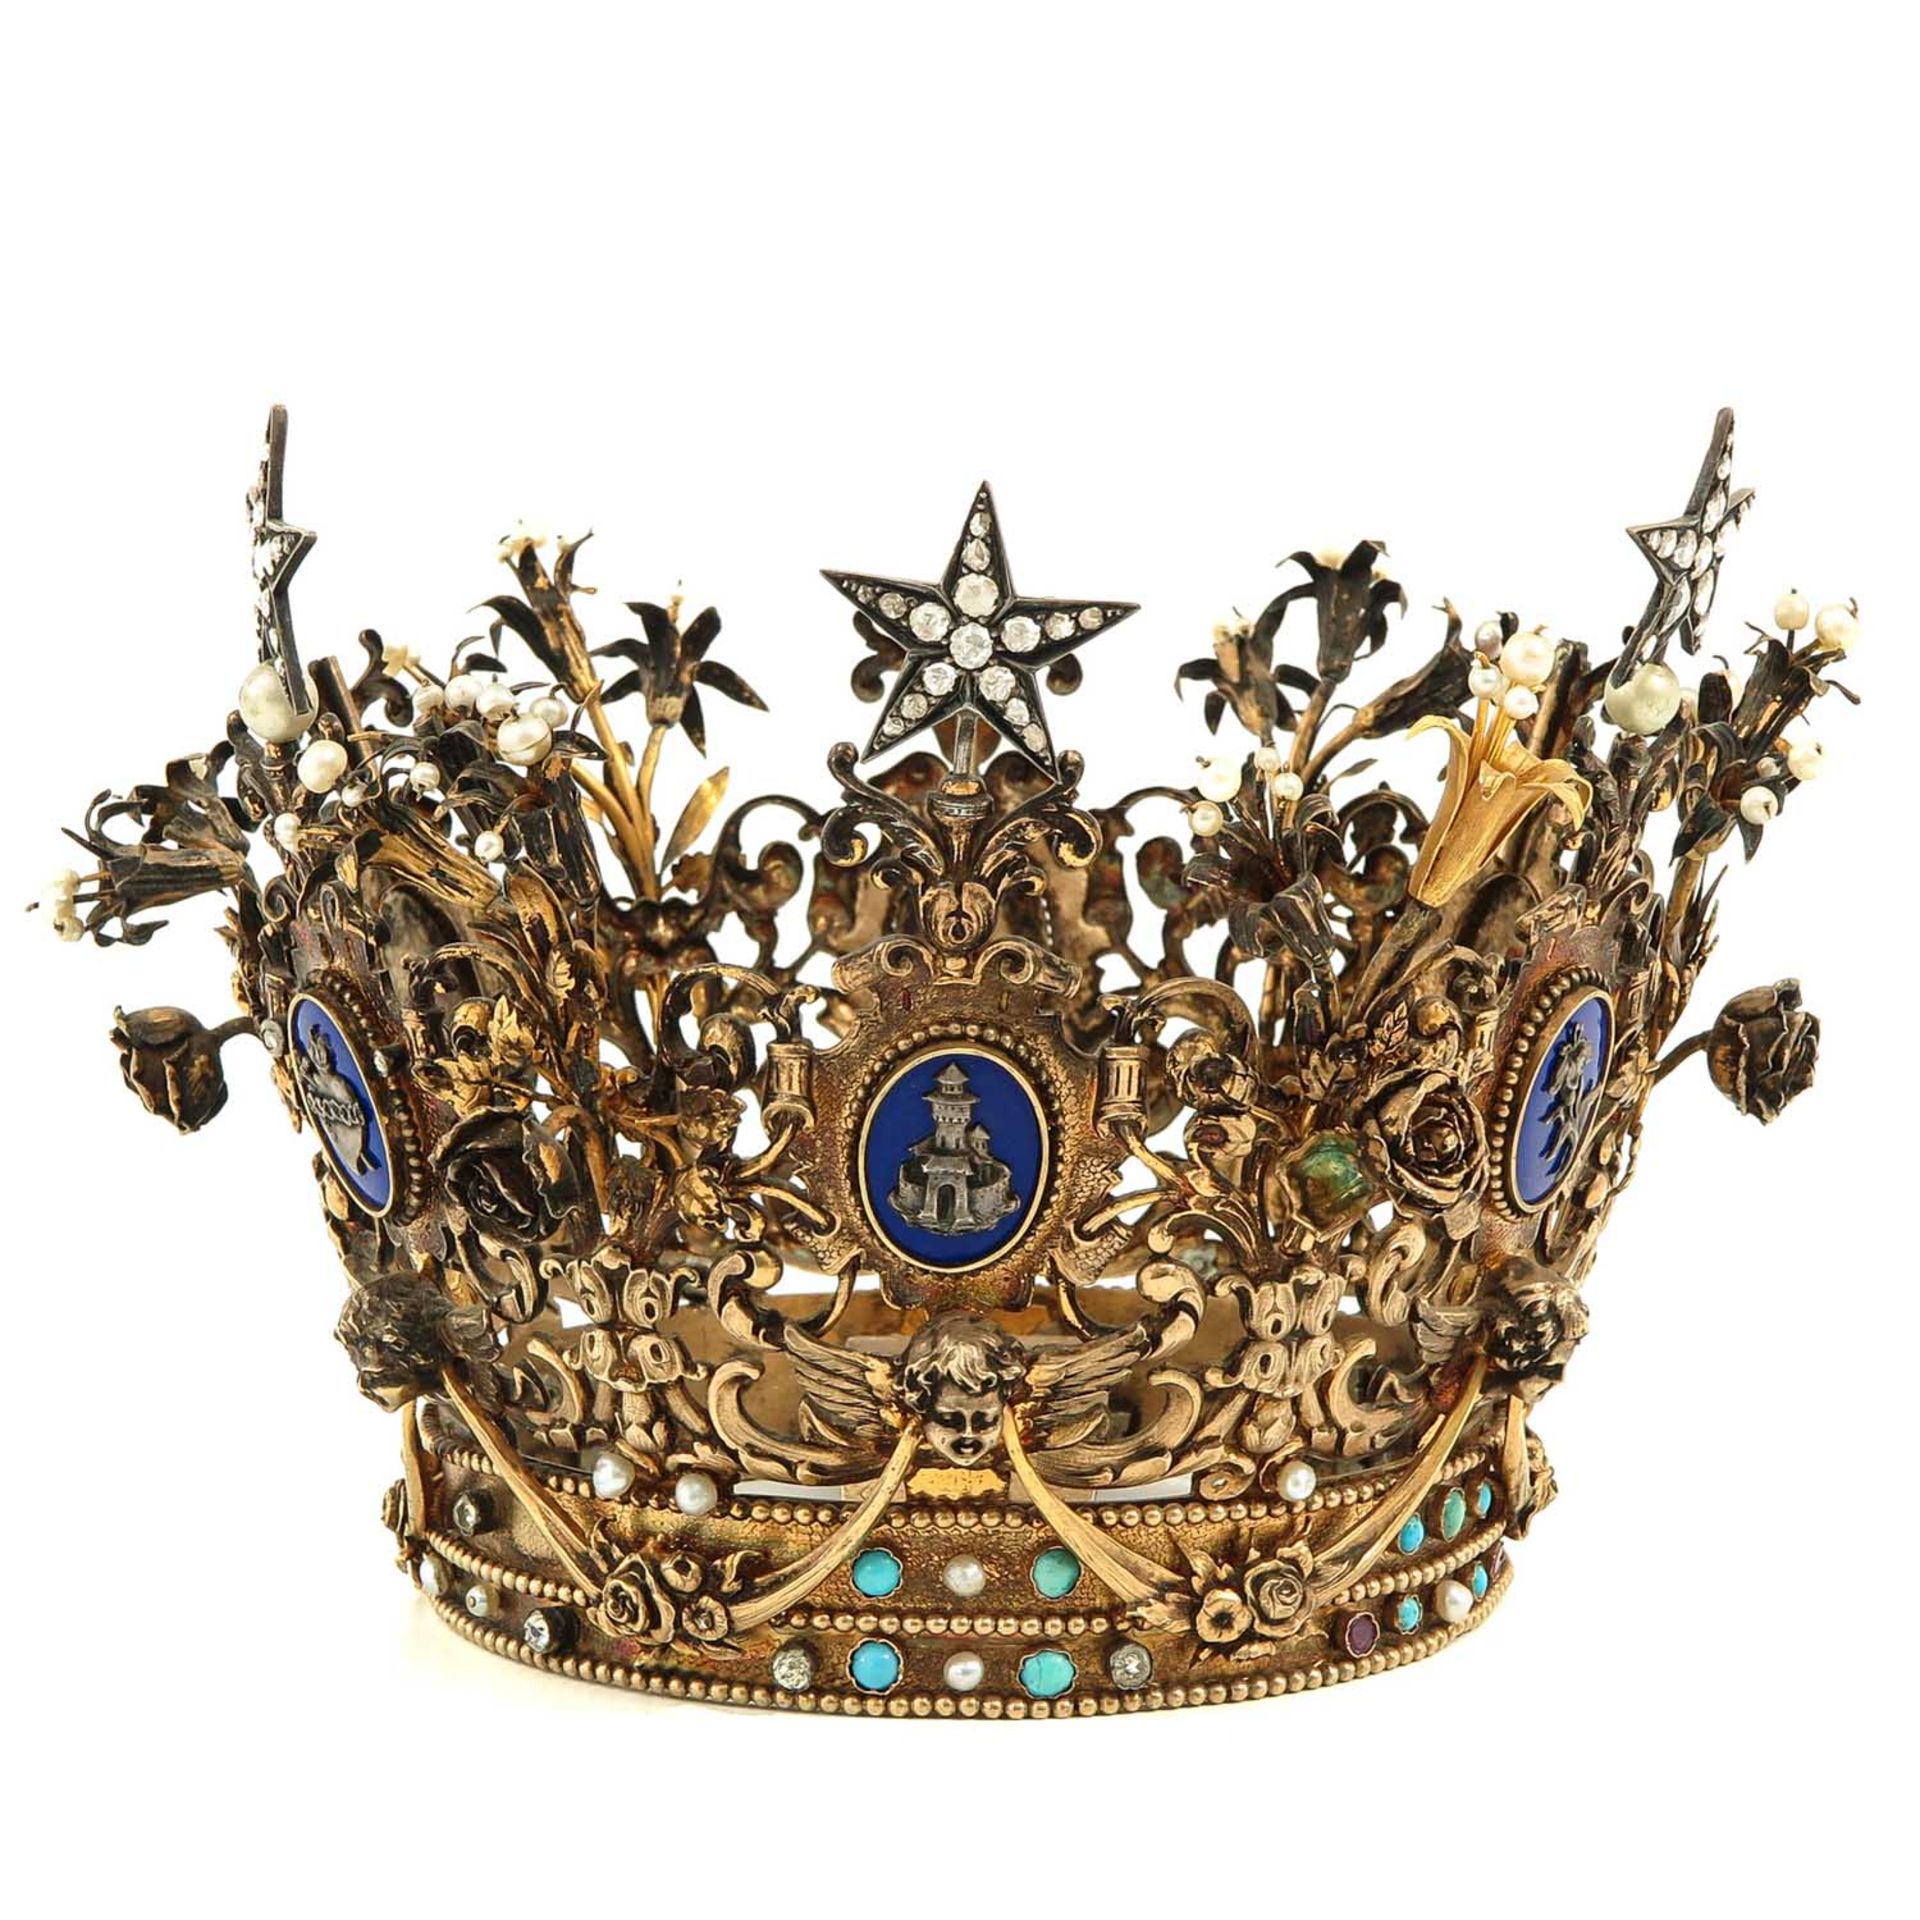 A Very Rare and Beautiful Silver and Diamond Crown